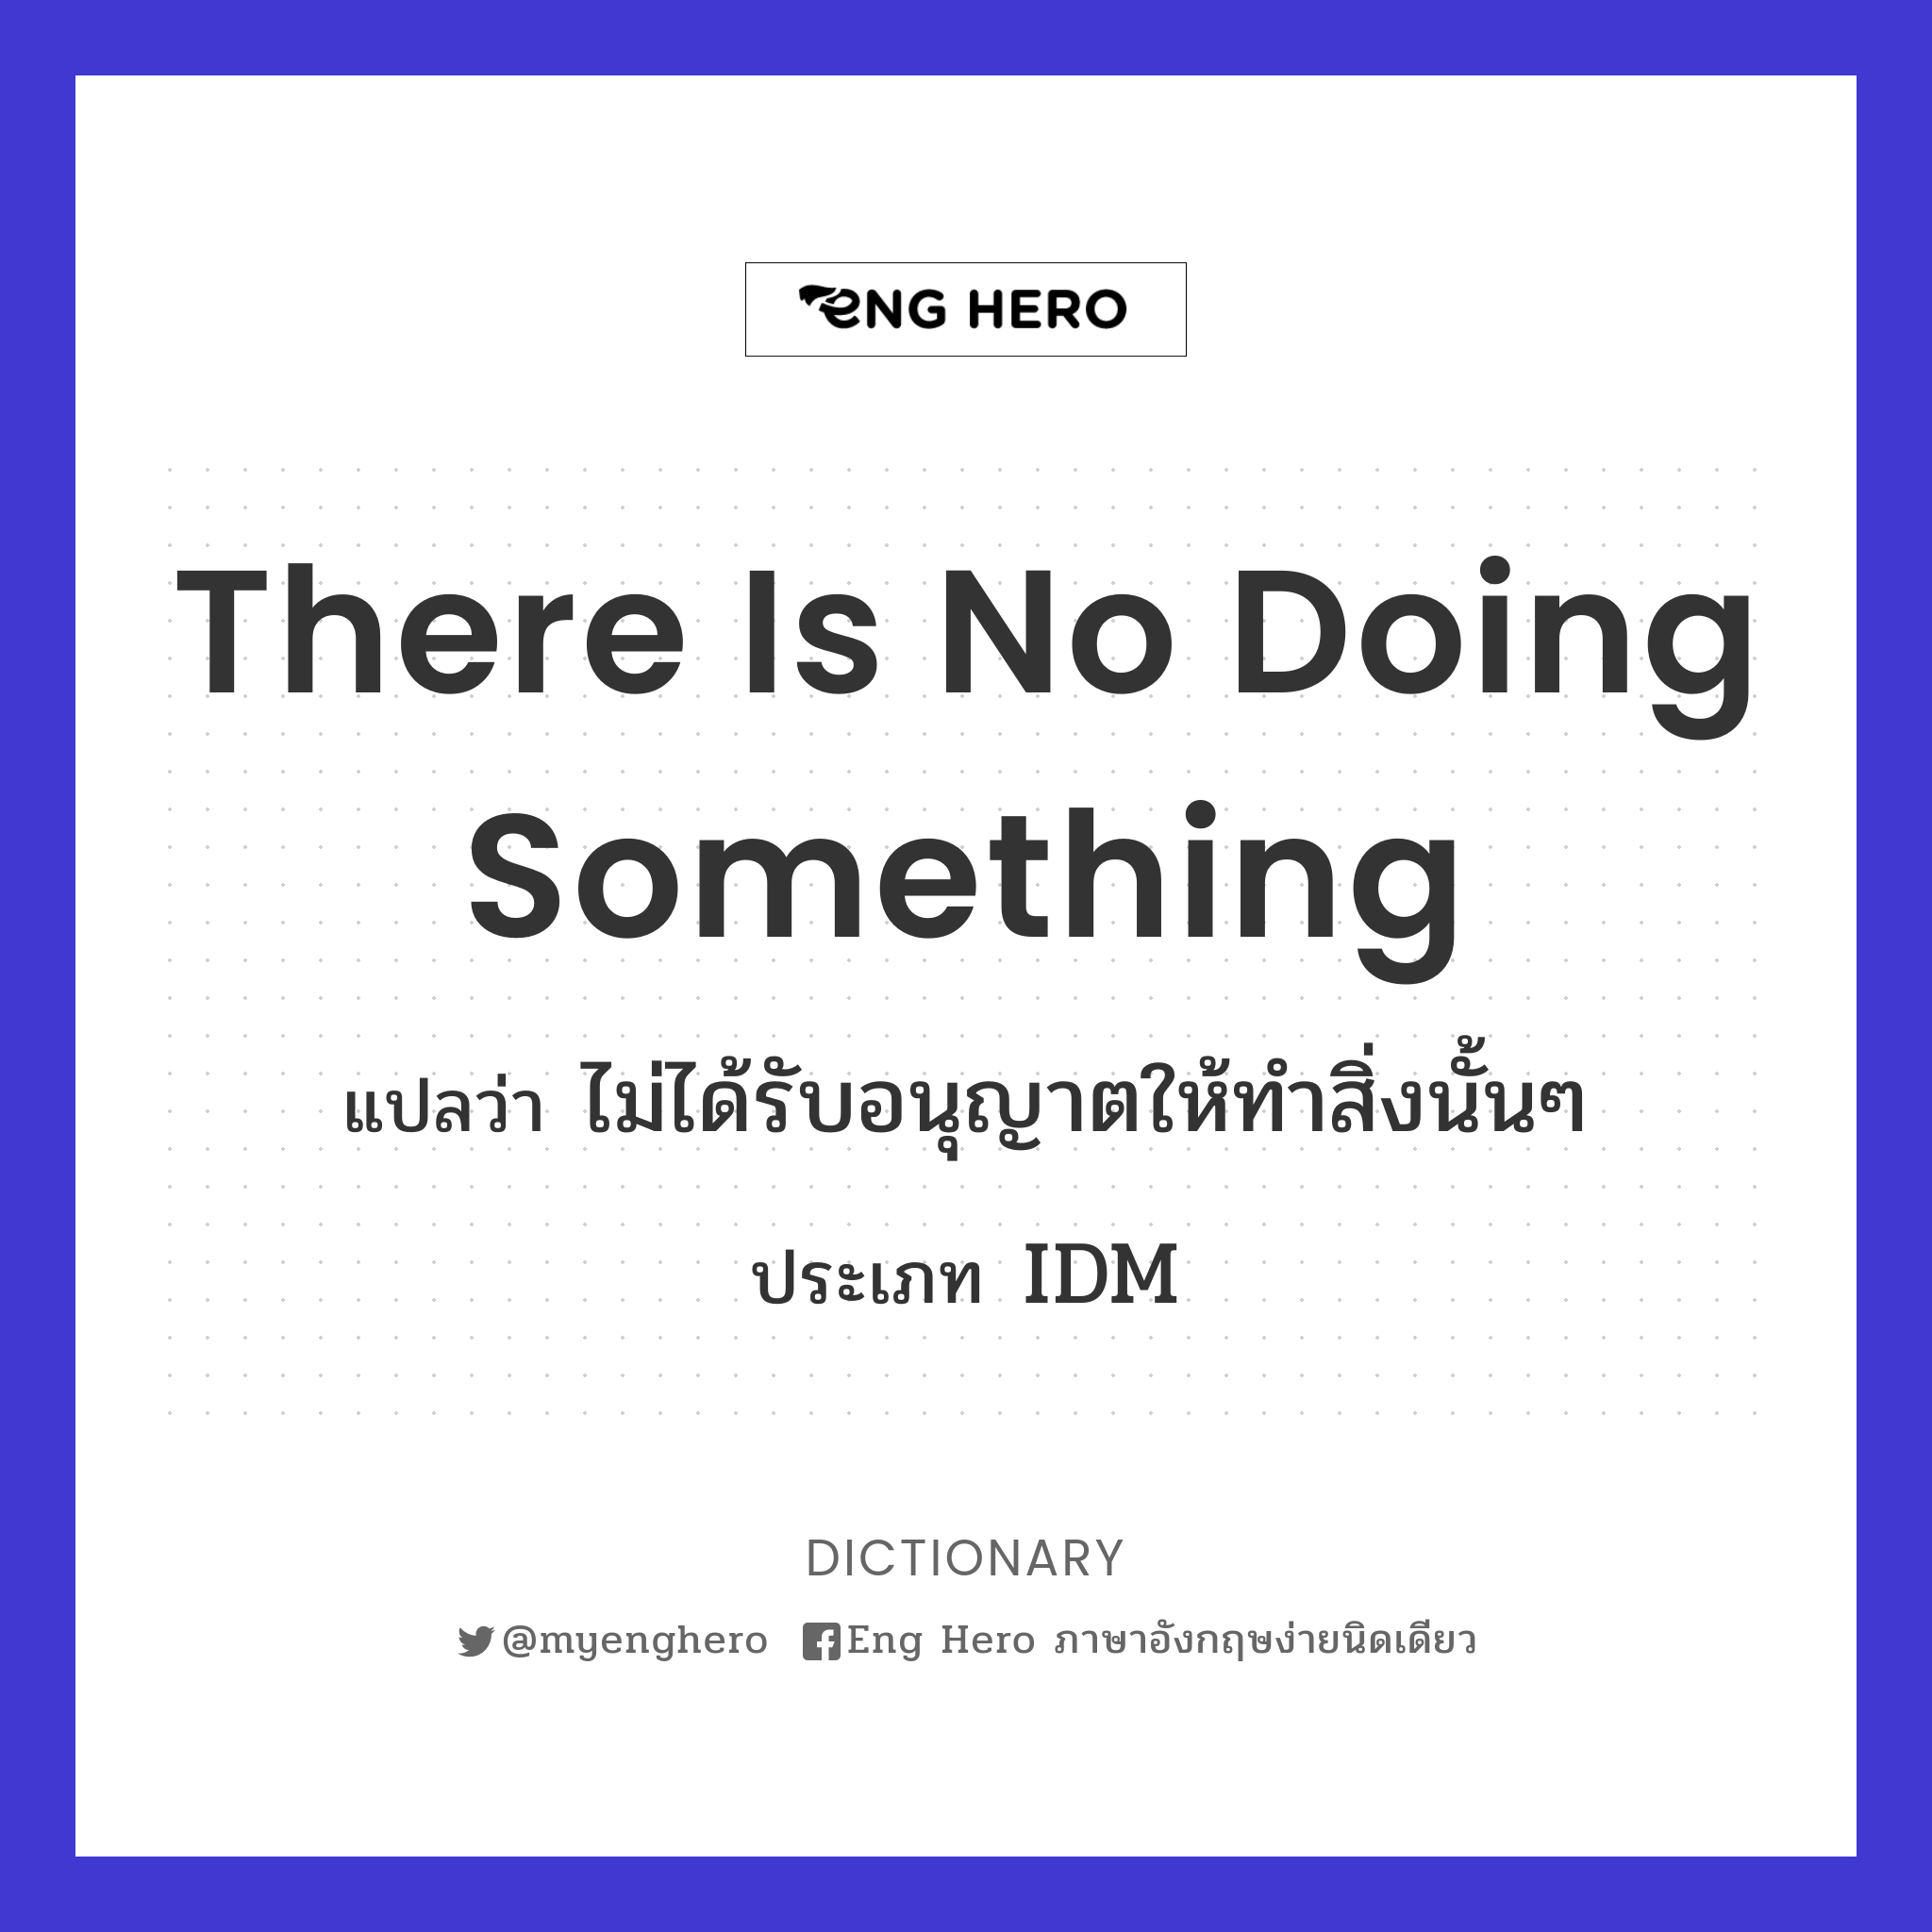 There is no doing something